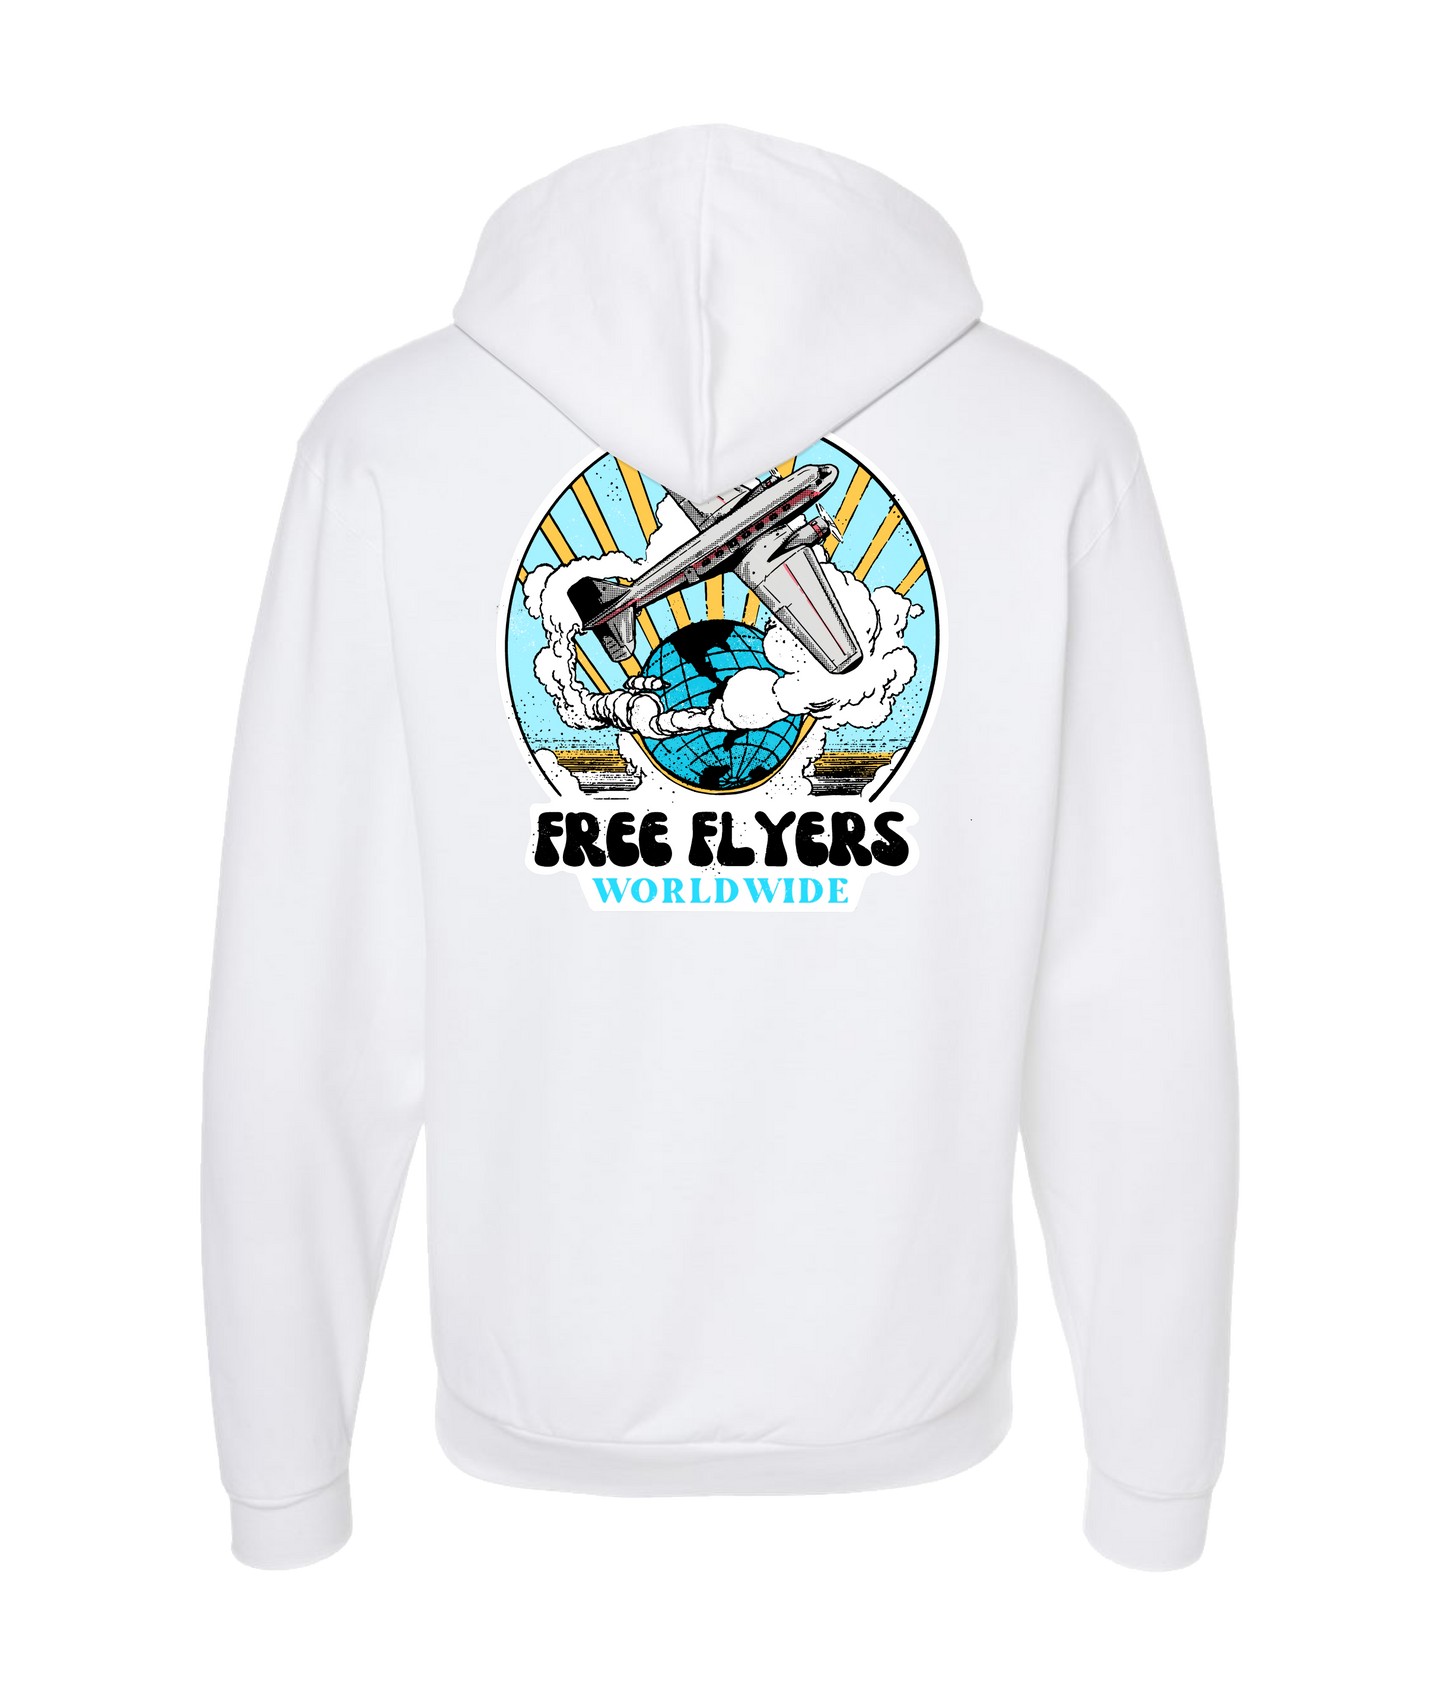 John Mana and the Free Flyers - Free Flyers Worldwide 3 - White Zip Up Hoodie